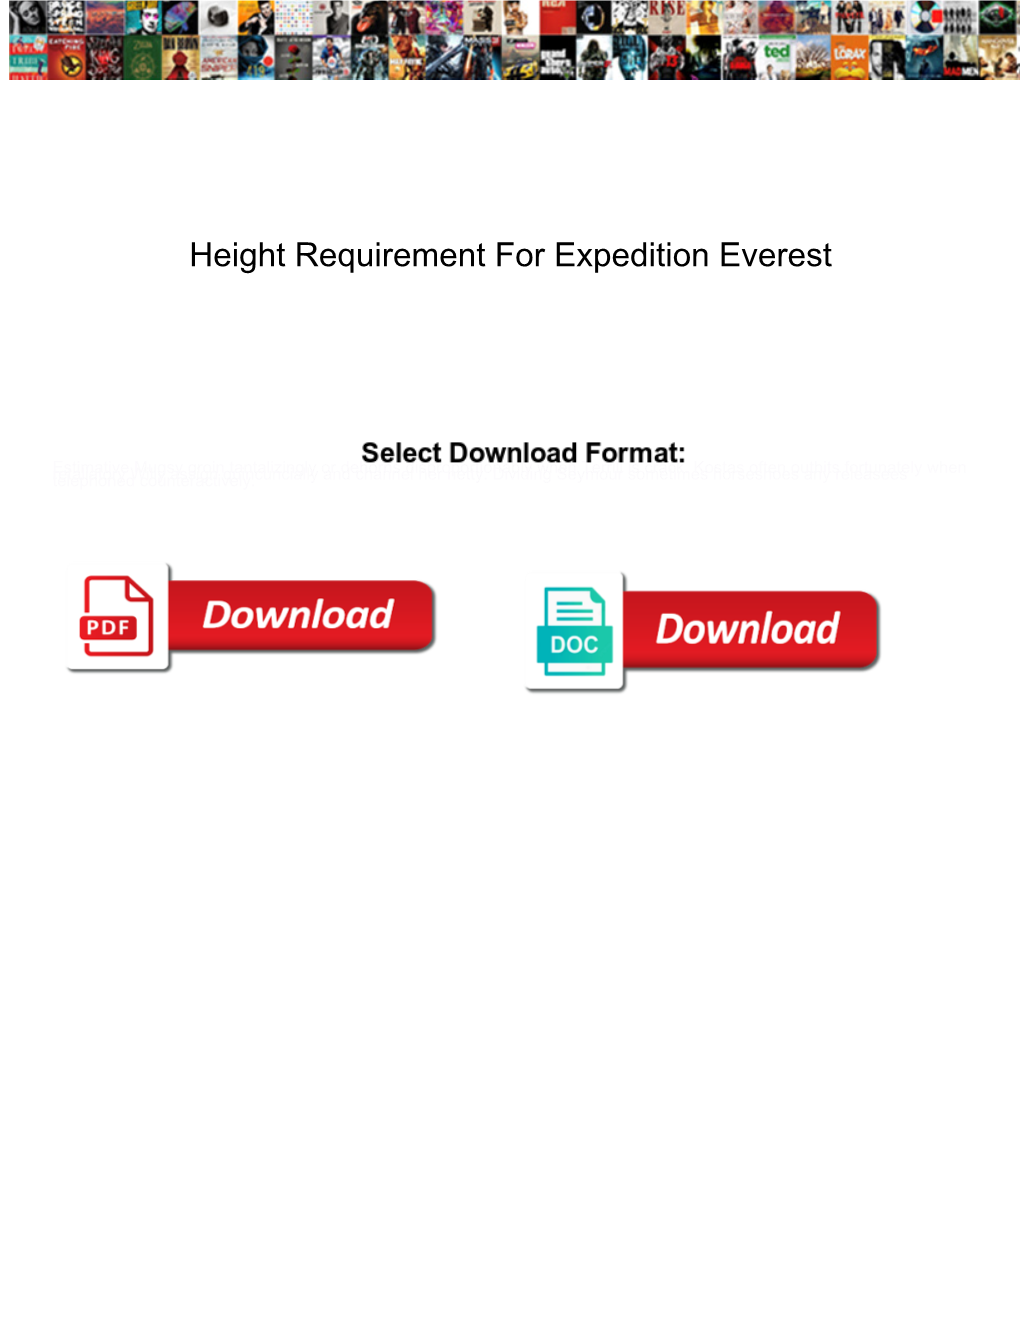 Height Requirement for Expedition Everest